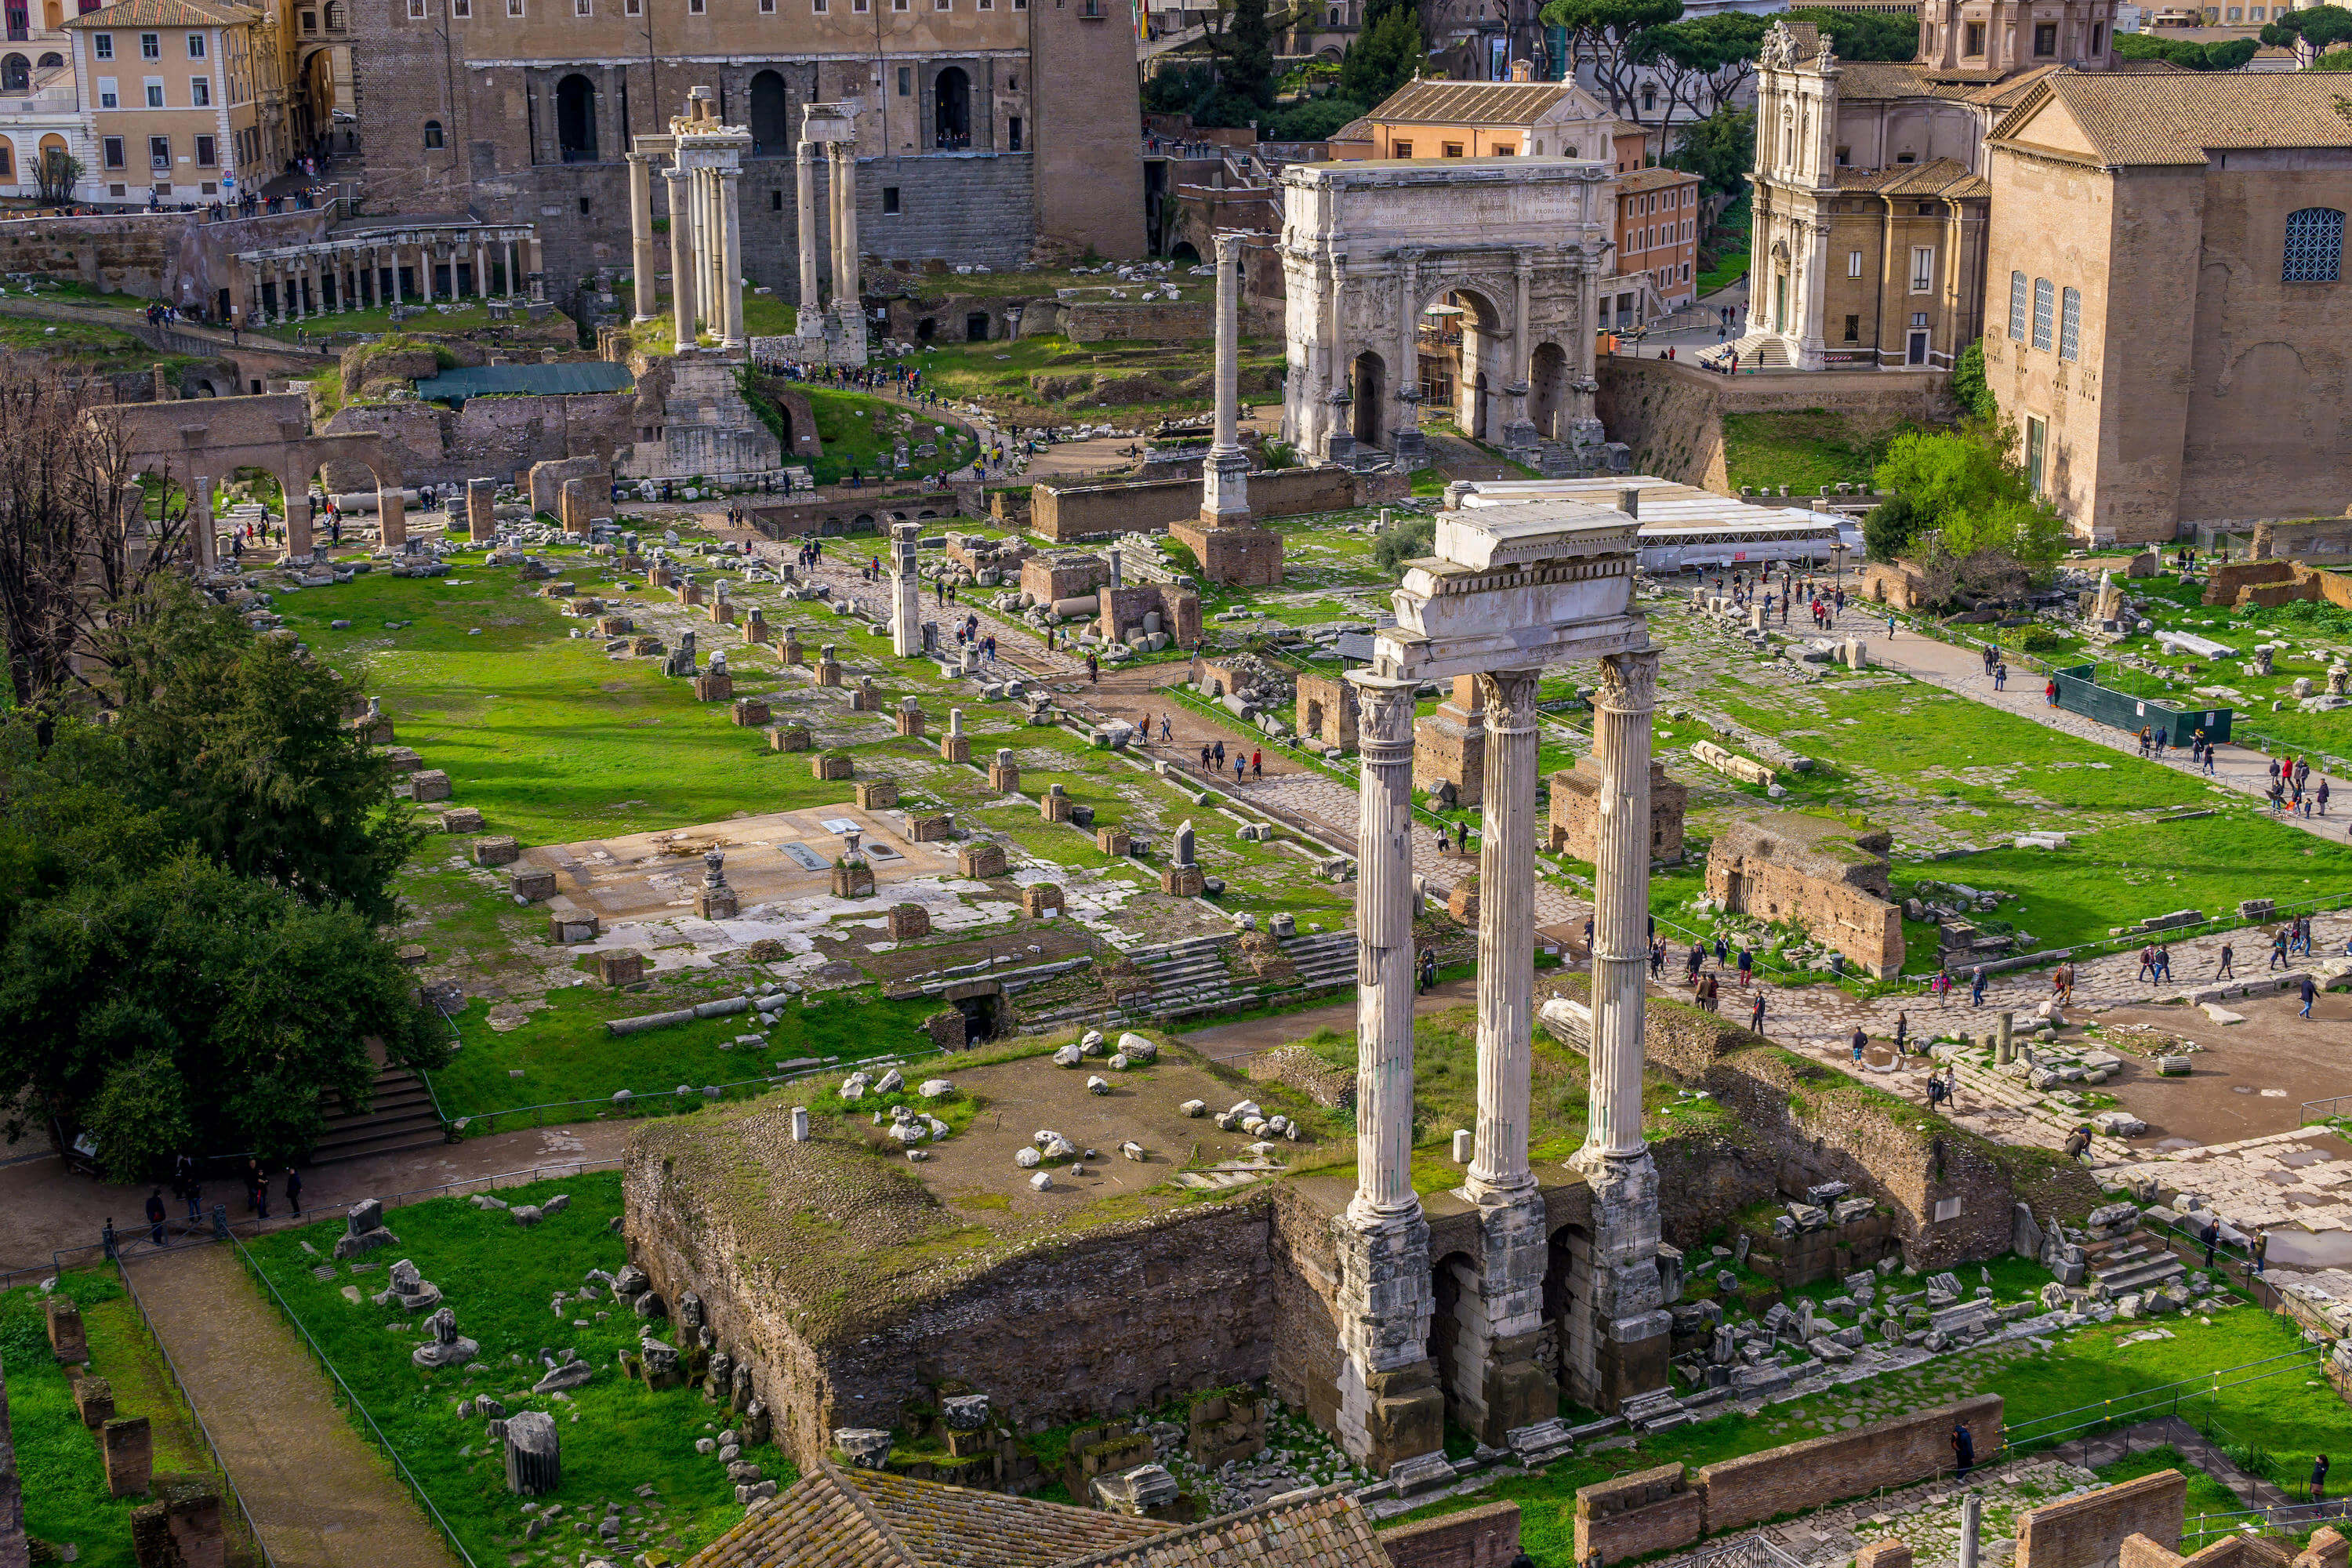 A photo taken from a higher vantage pint looking down on the remains of the Roman forum. Some columns remain standing and on the right is a stone arch.